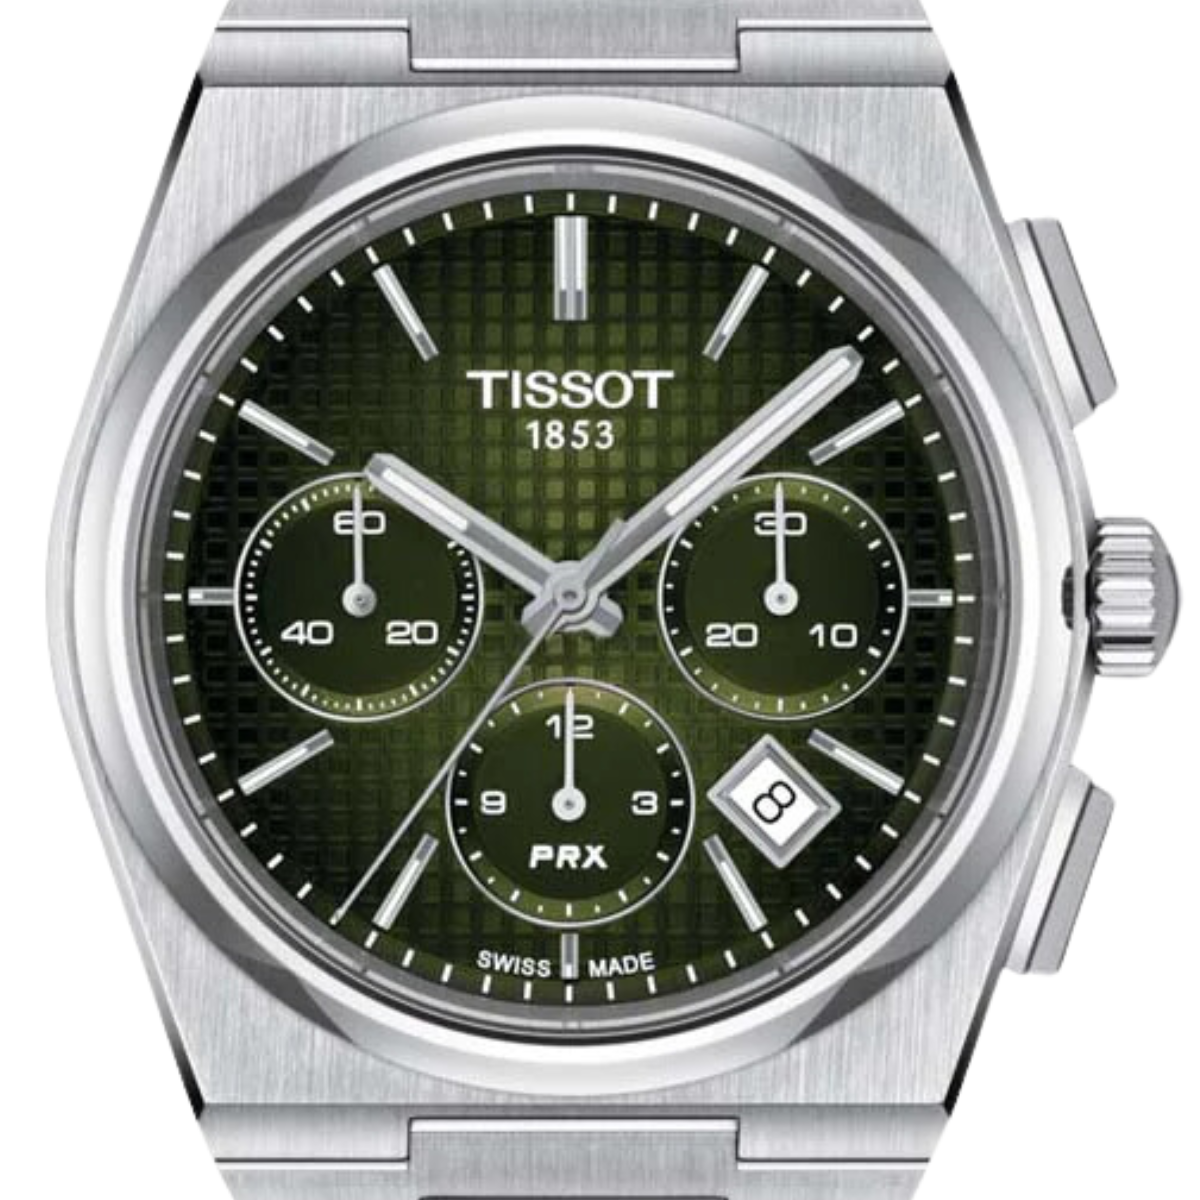 Tissot 1853 PRX T137.427.11.091.00 T1374271109100 Chronograph Automatic Green Dial Watch - Skywatches